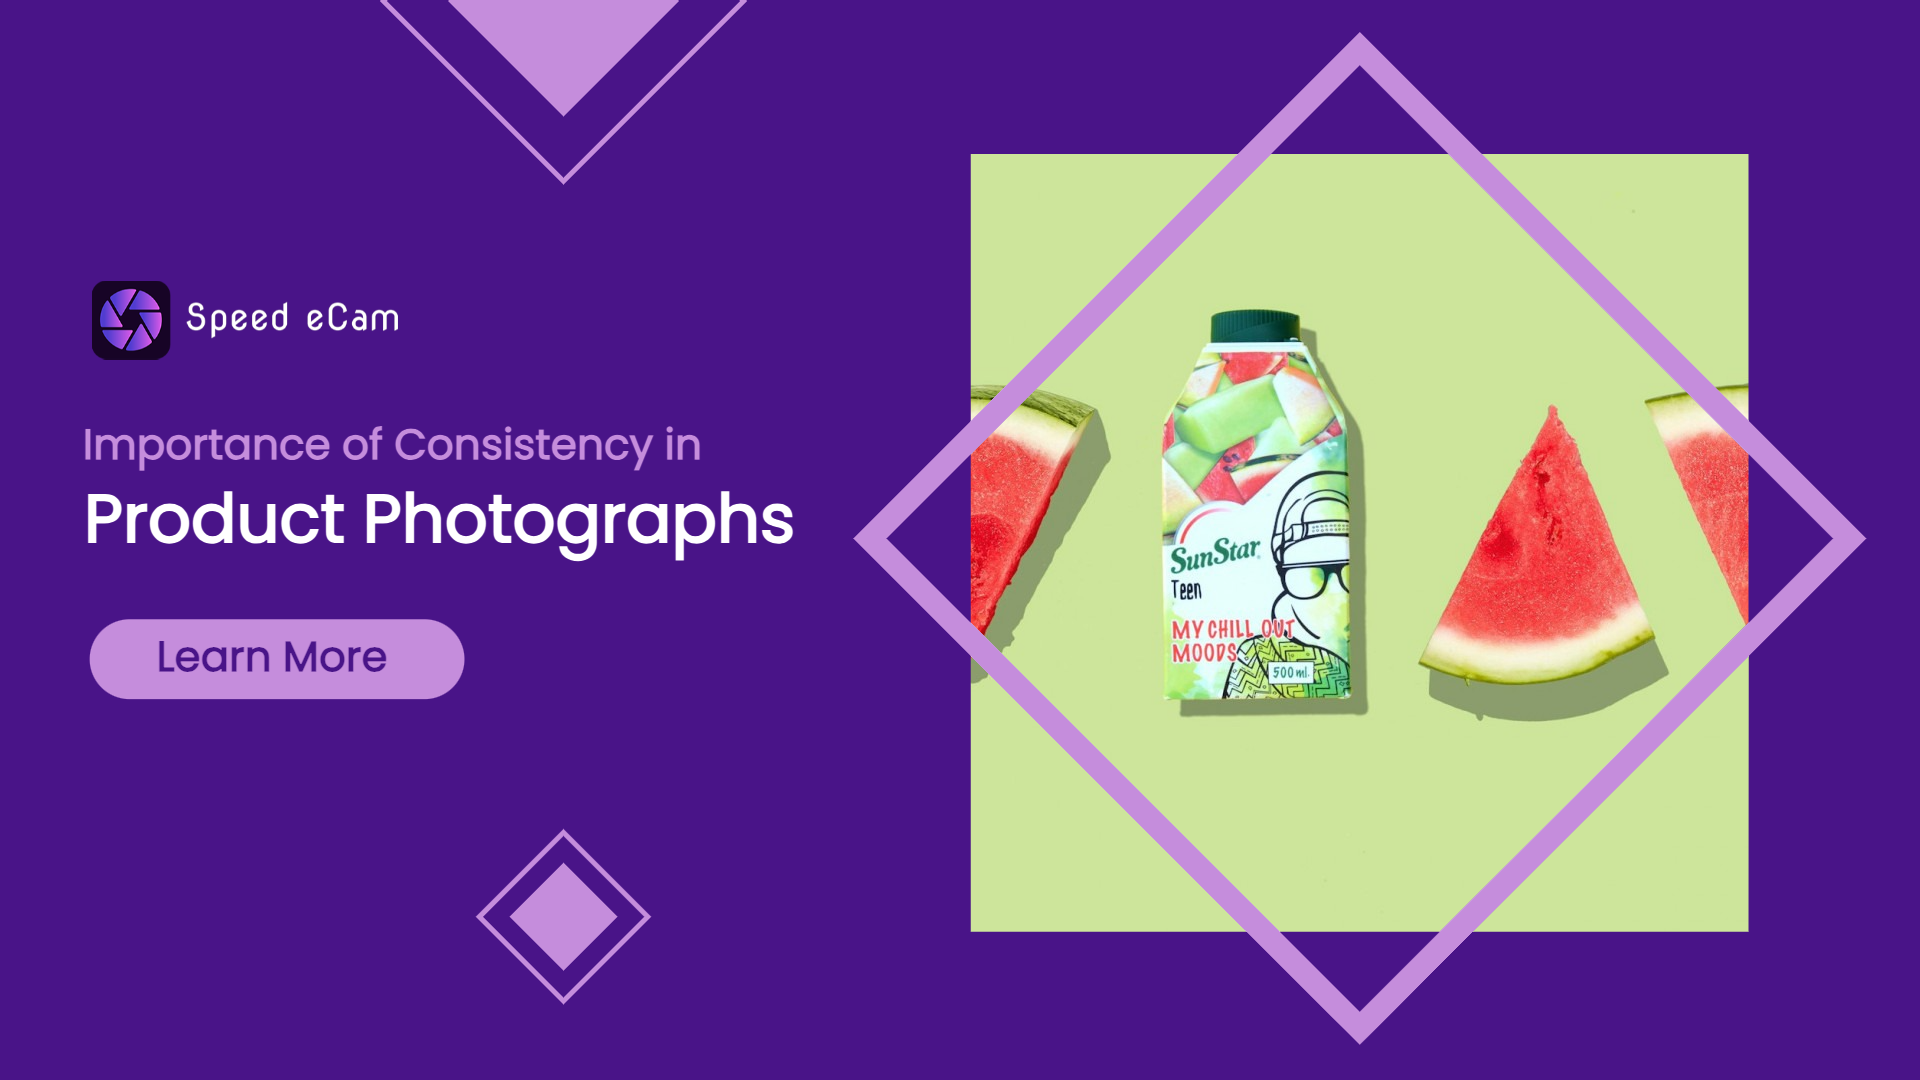 Importance of Consistency in Product Photographs